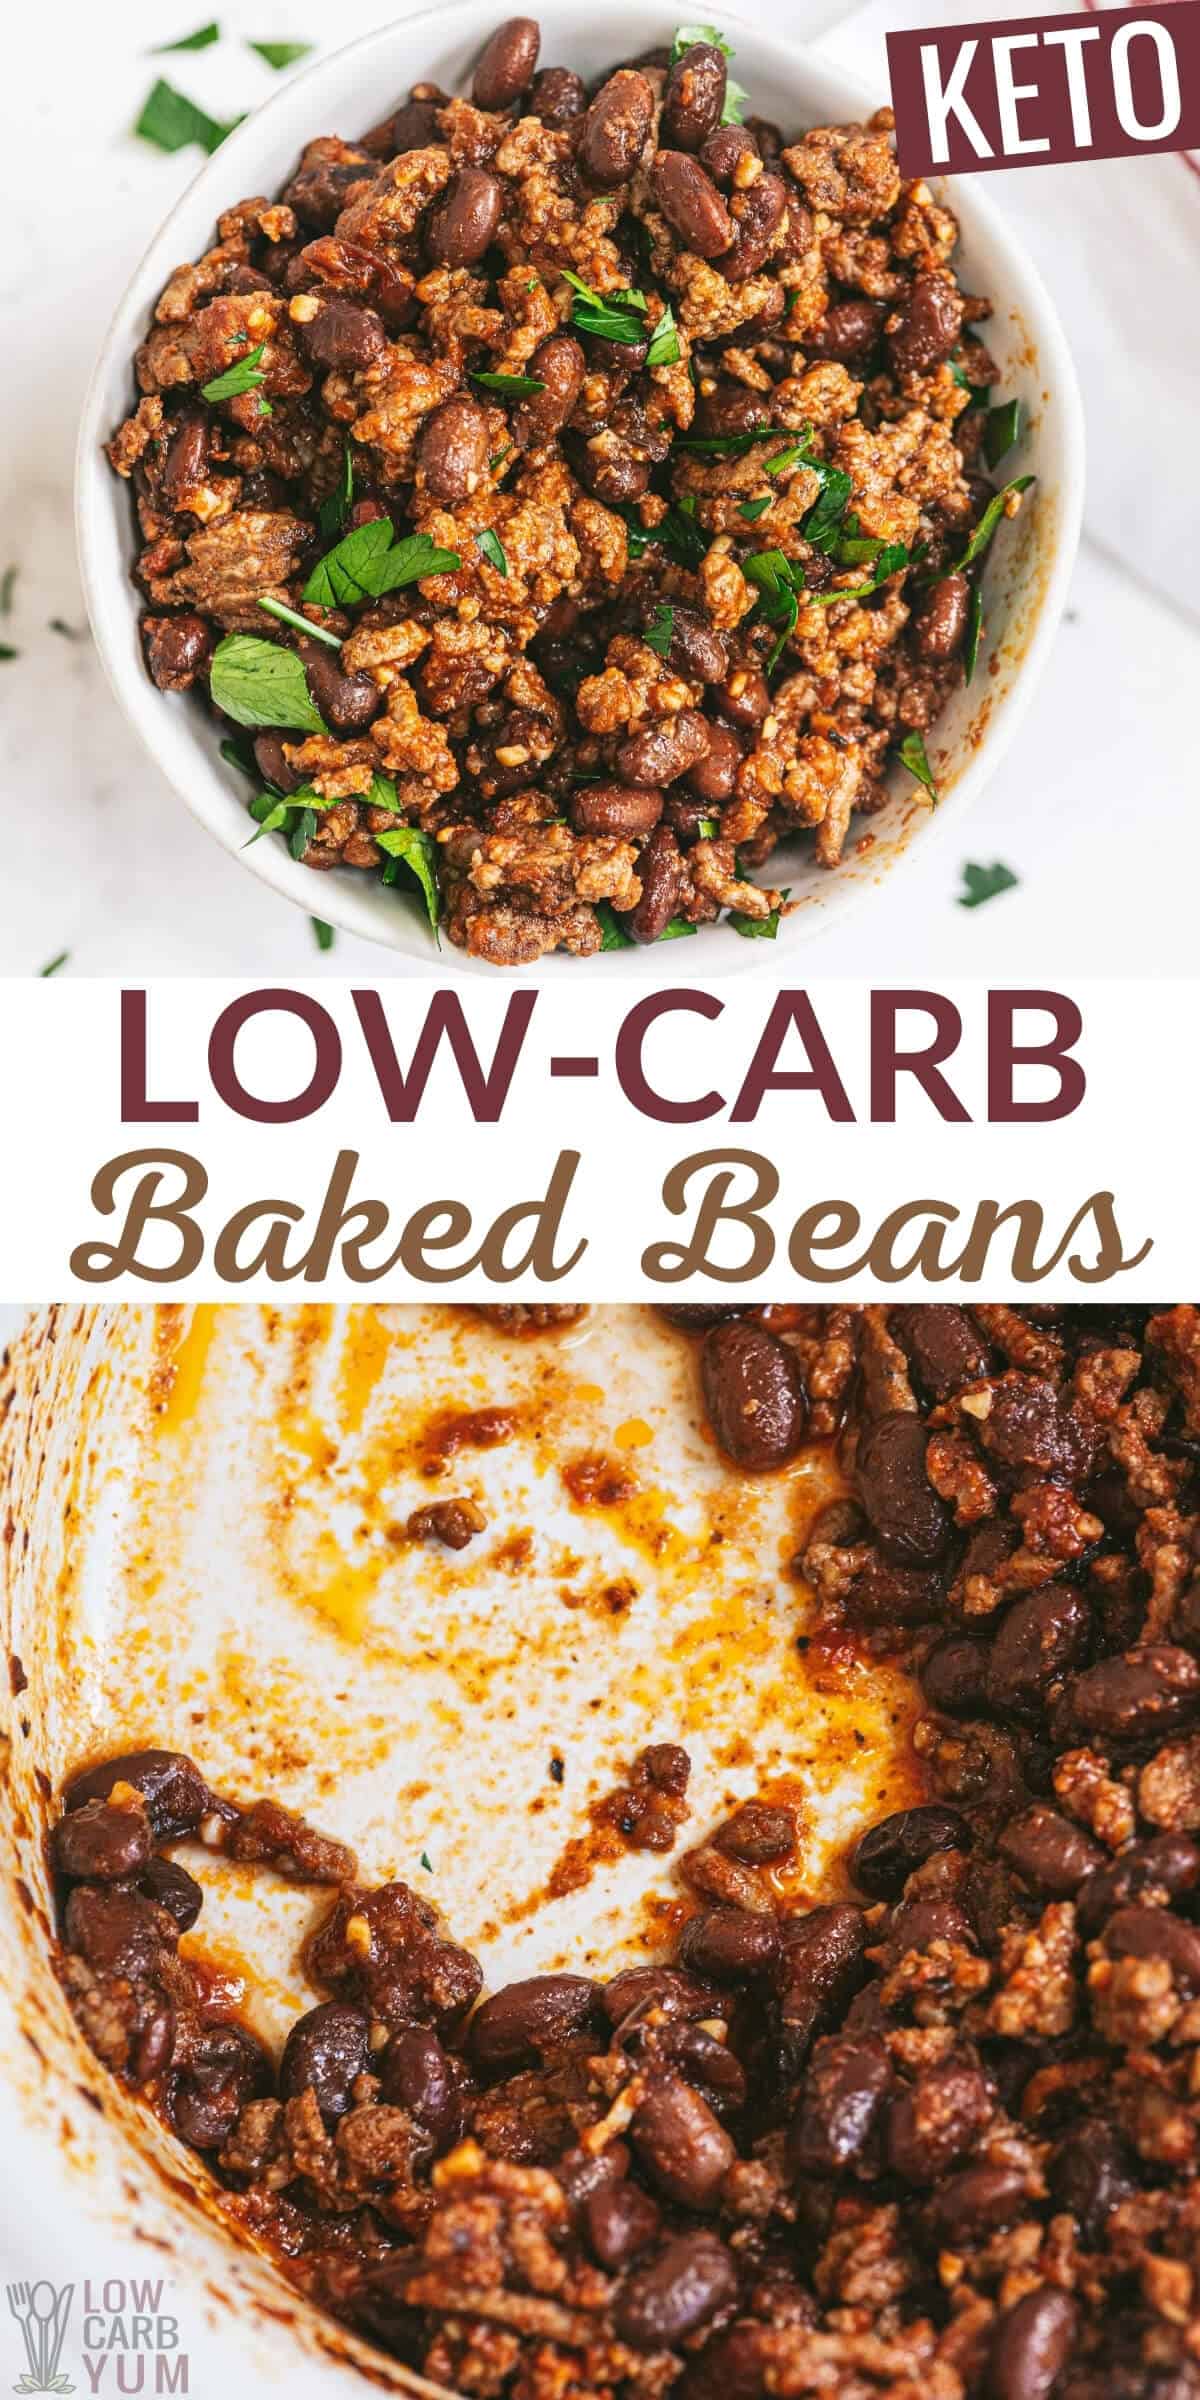 low-carb keto baked beans